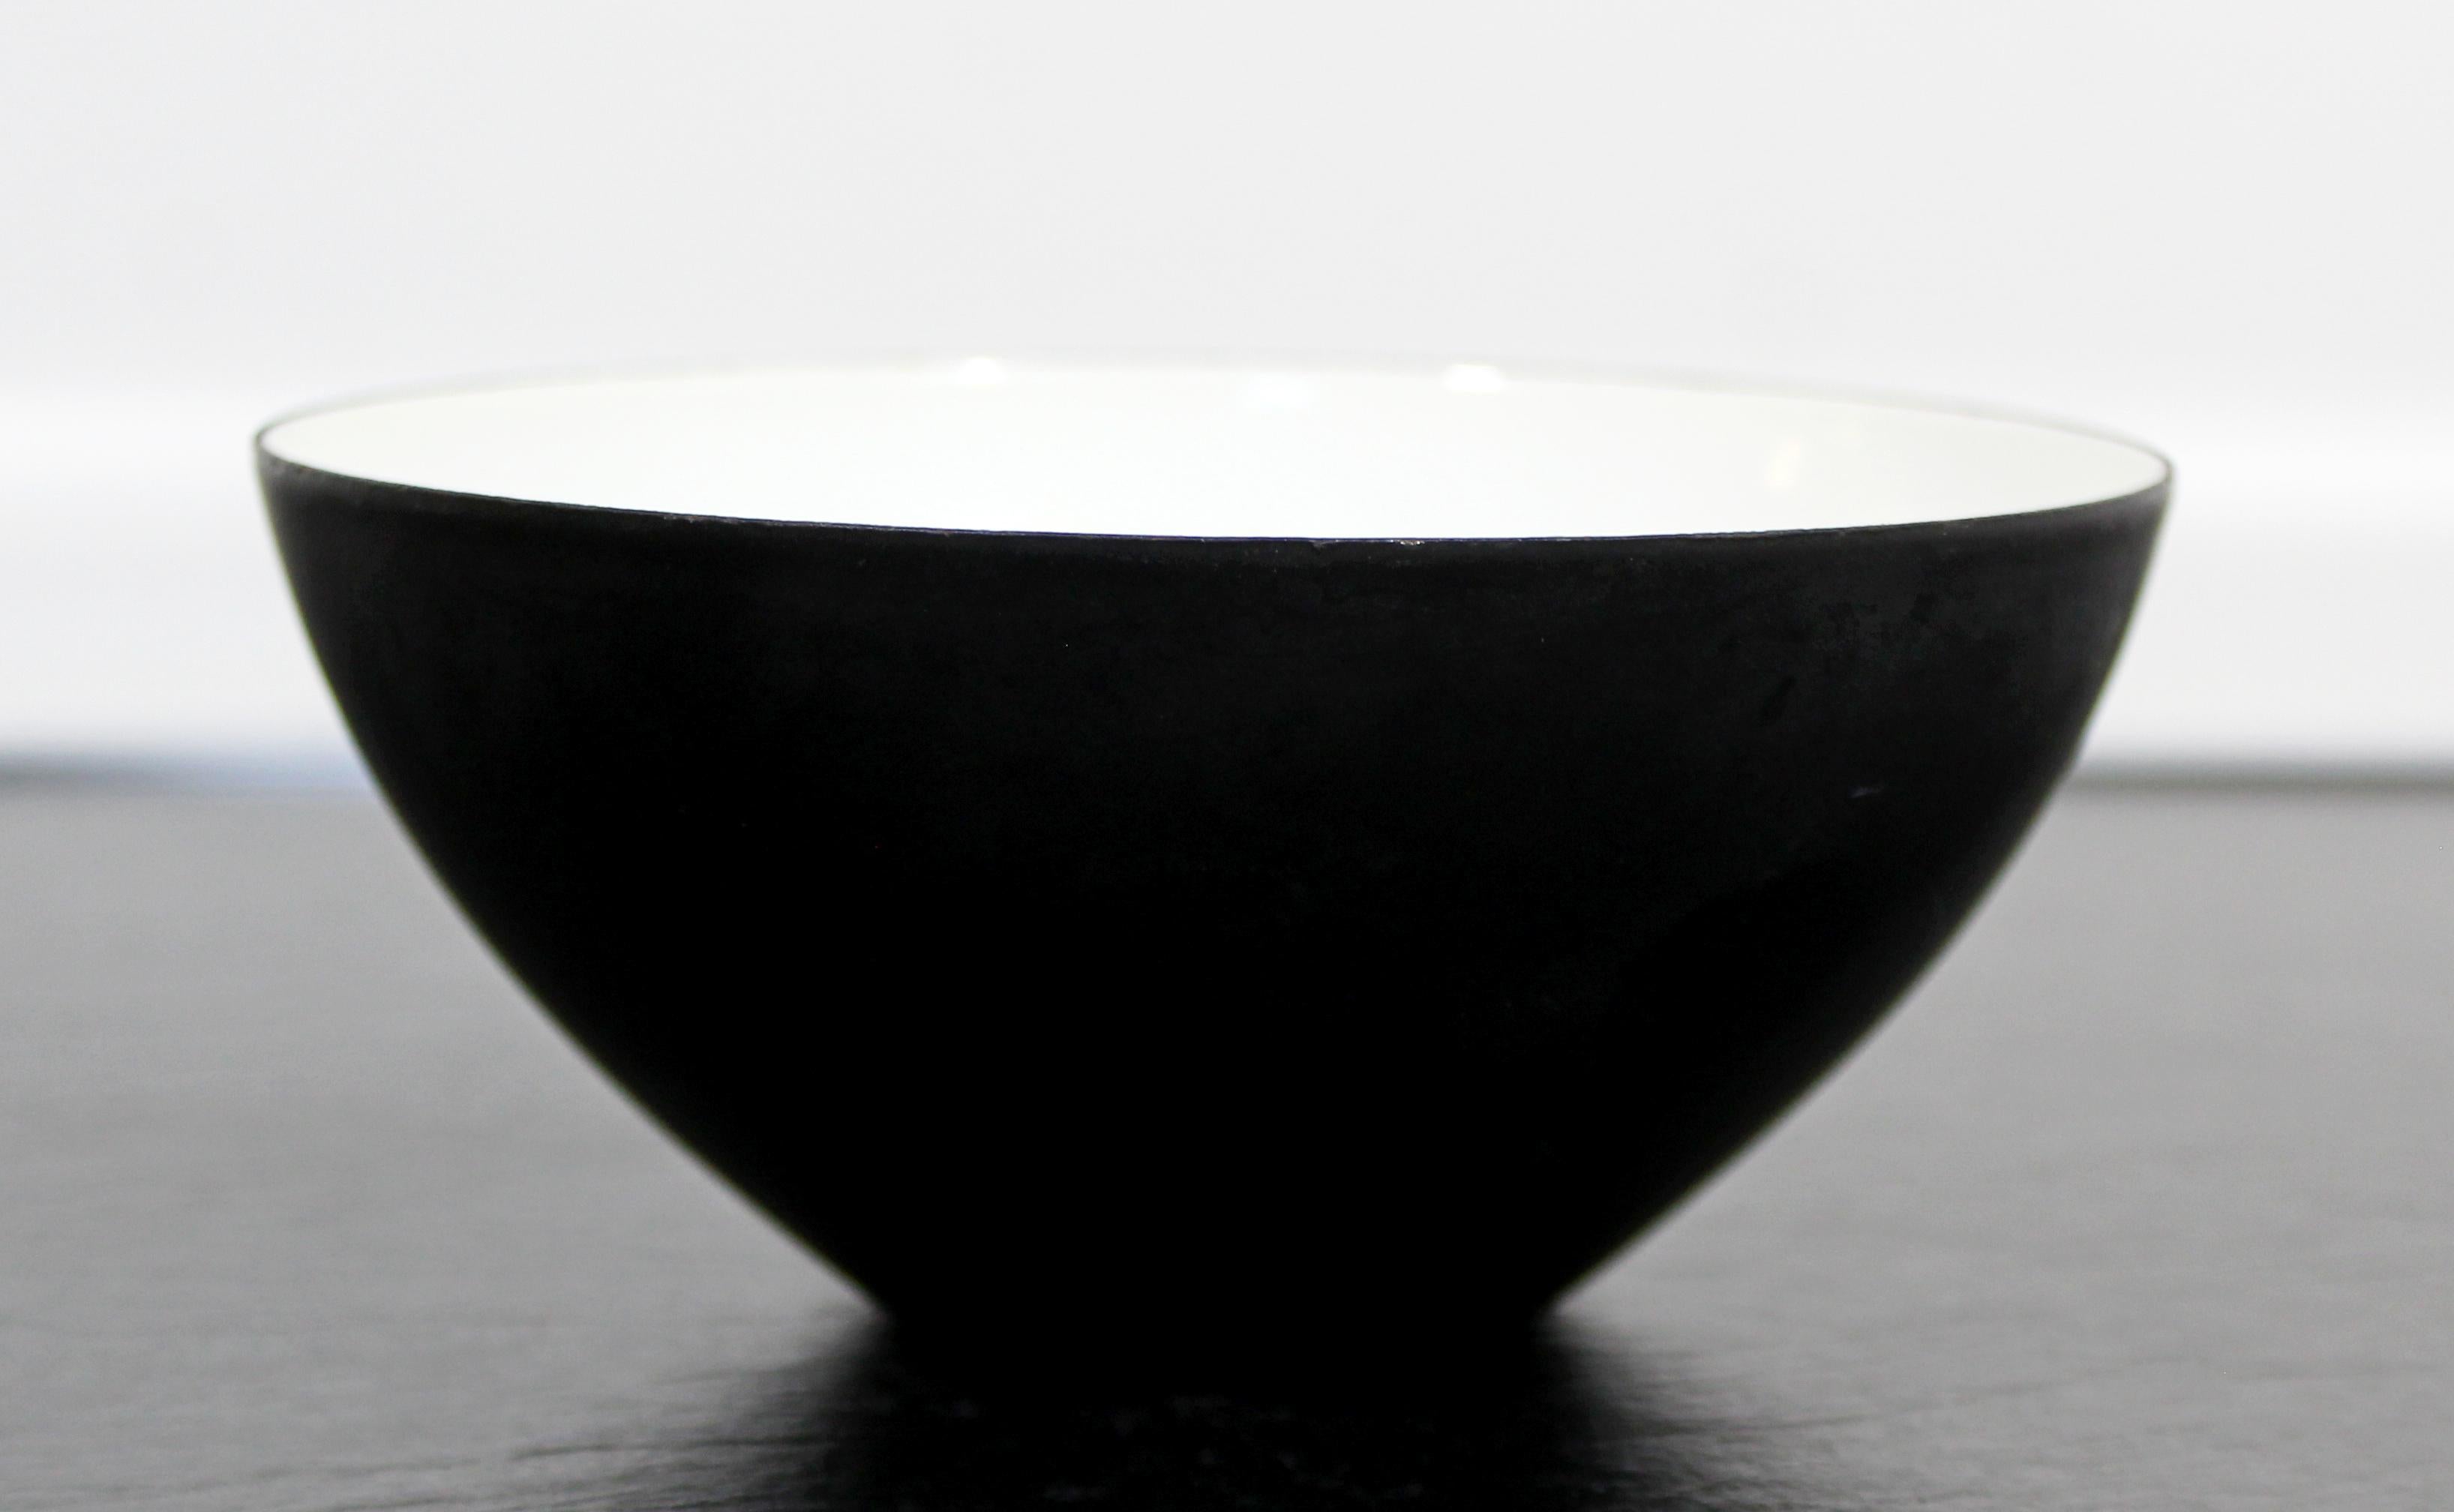 For your consideration is a splendid, white enamel art bowl, by Herbert Krenchel, made in Denmark. In excellent condition. The dimensions are 5